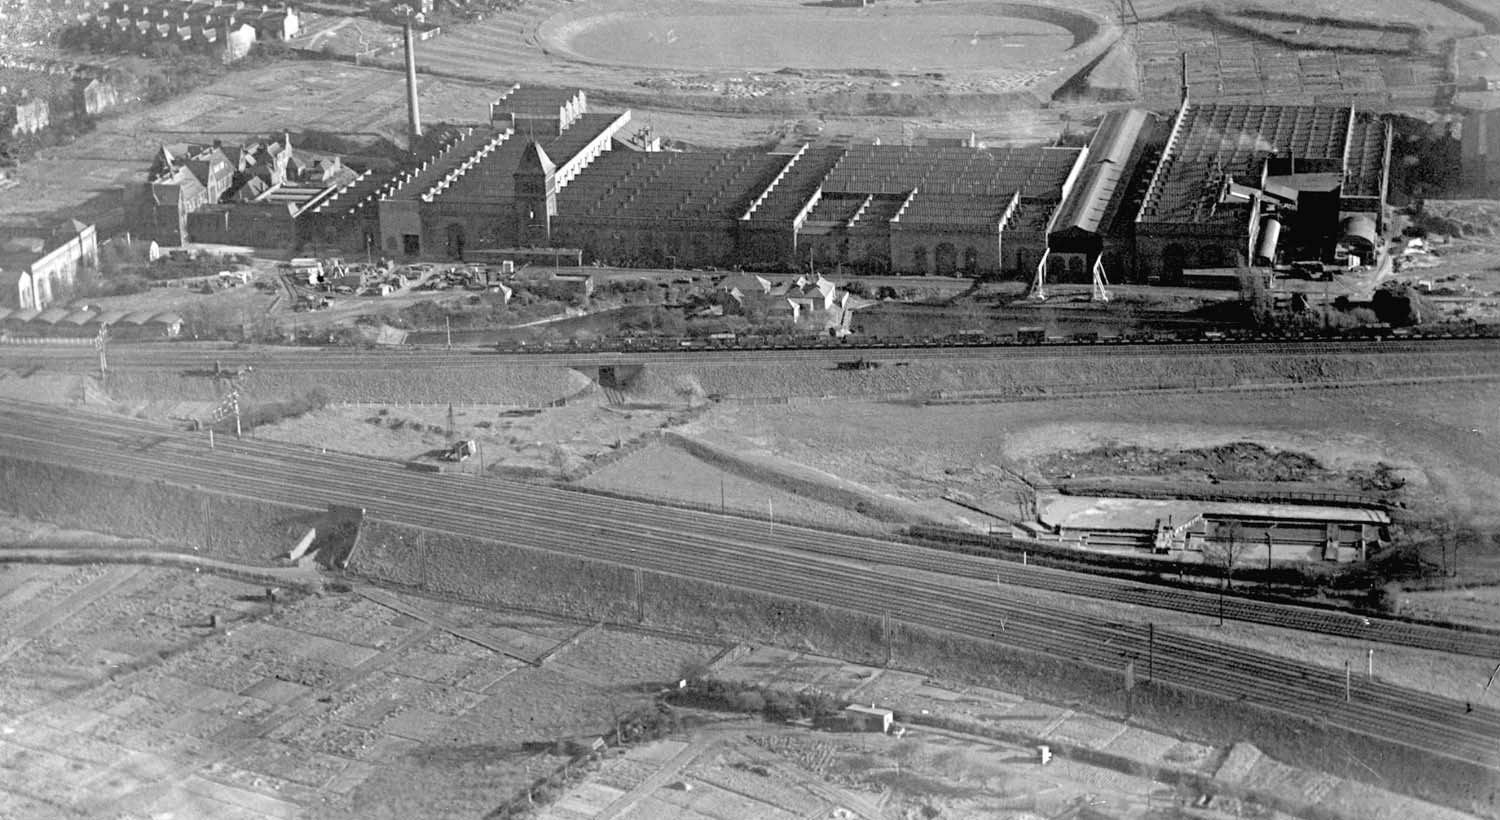 A 1930 aerial view of the junction between the Trent Valley lines and the lines to Coventry with the Rugby to Leamington line in front of Willans & Robertson's Victoria works